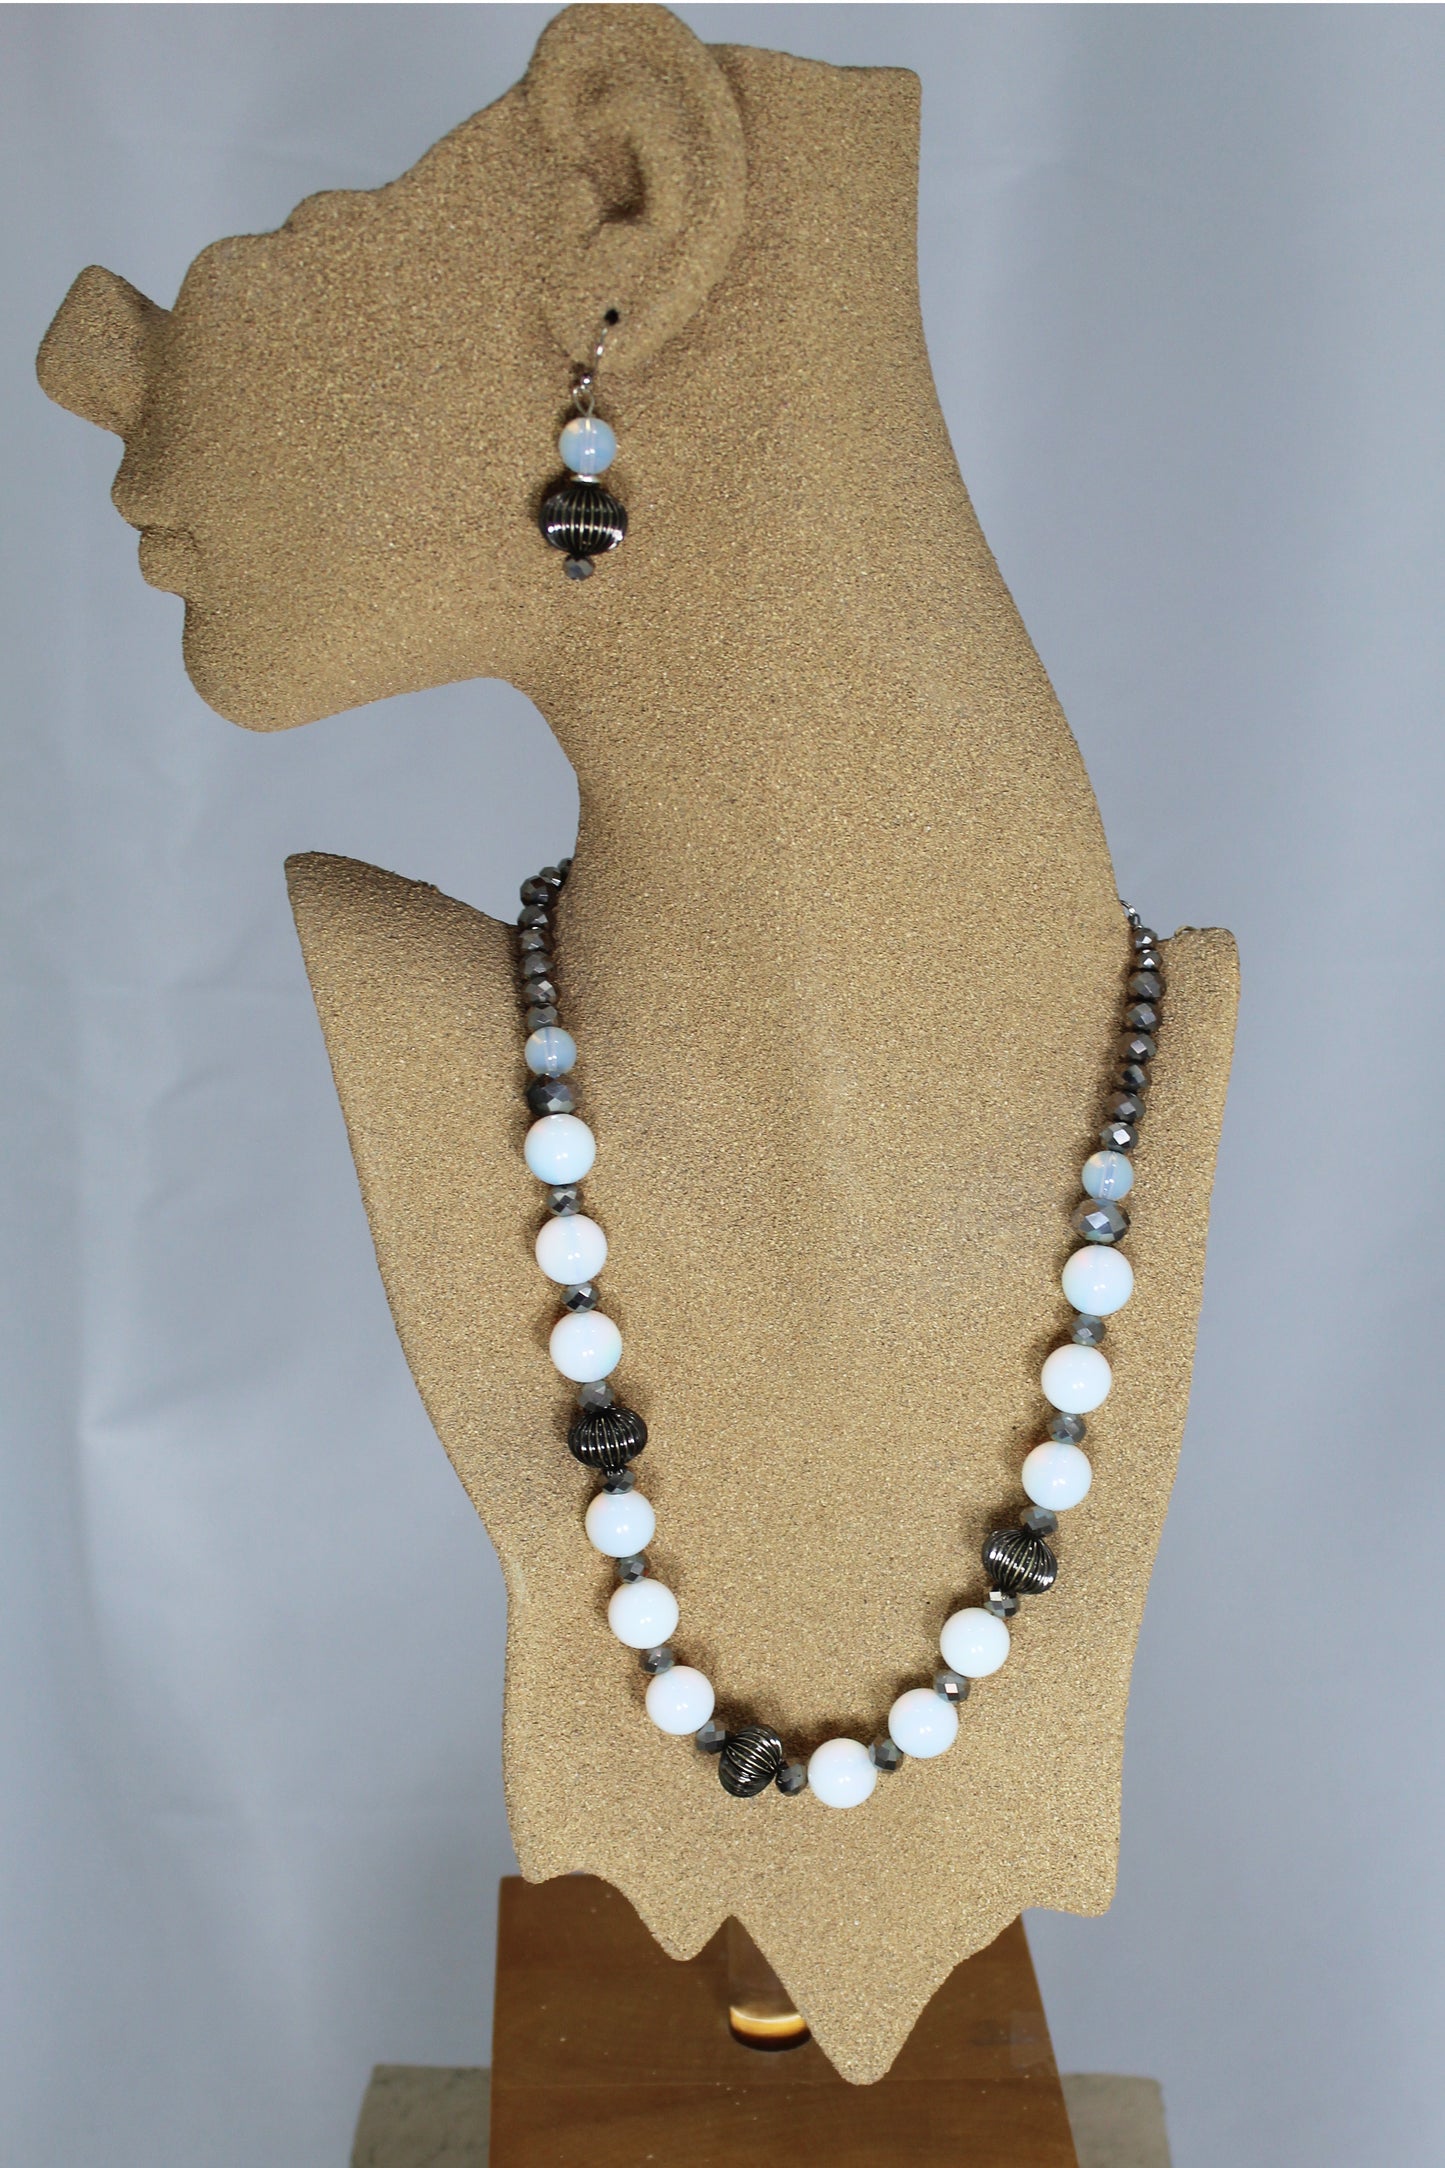 B. Aston Necklace and Earrings